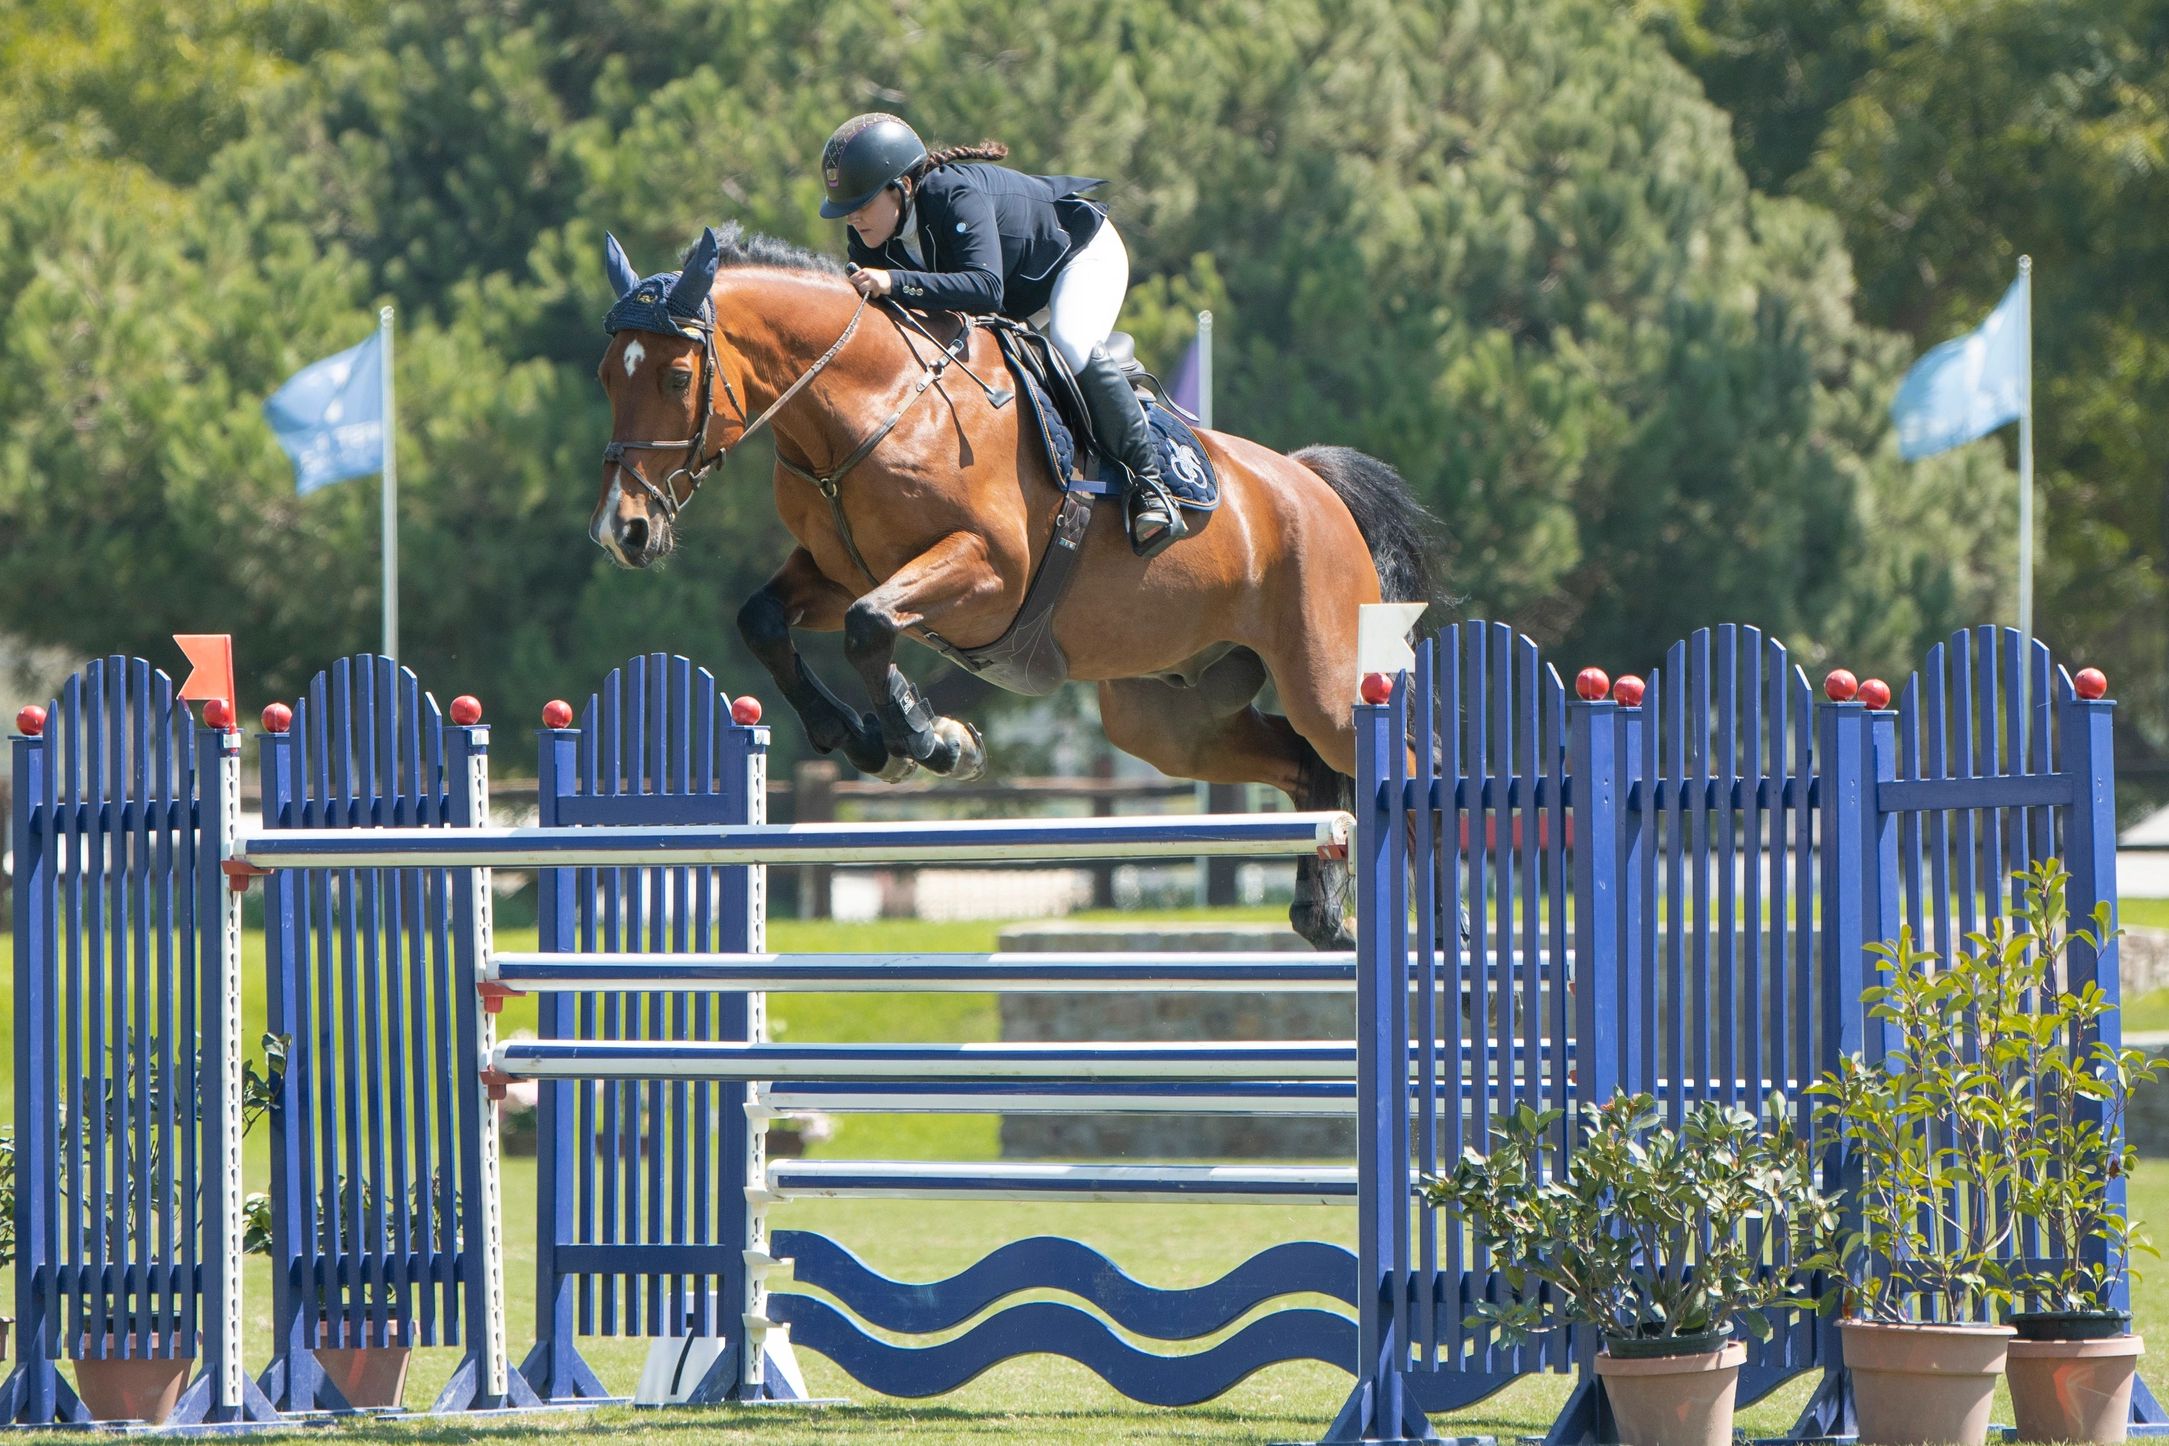 Sloan Elmassian and Centurion at the West Palms Events' $22,500 Del Mar Fall Grand Prix